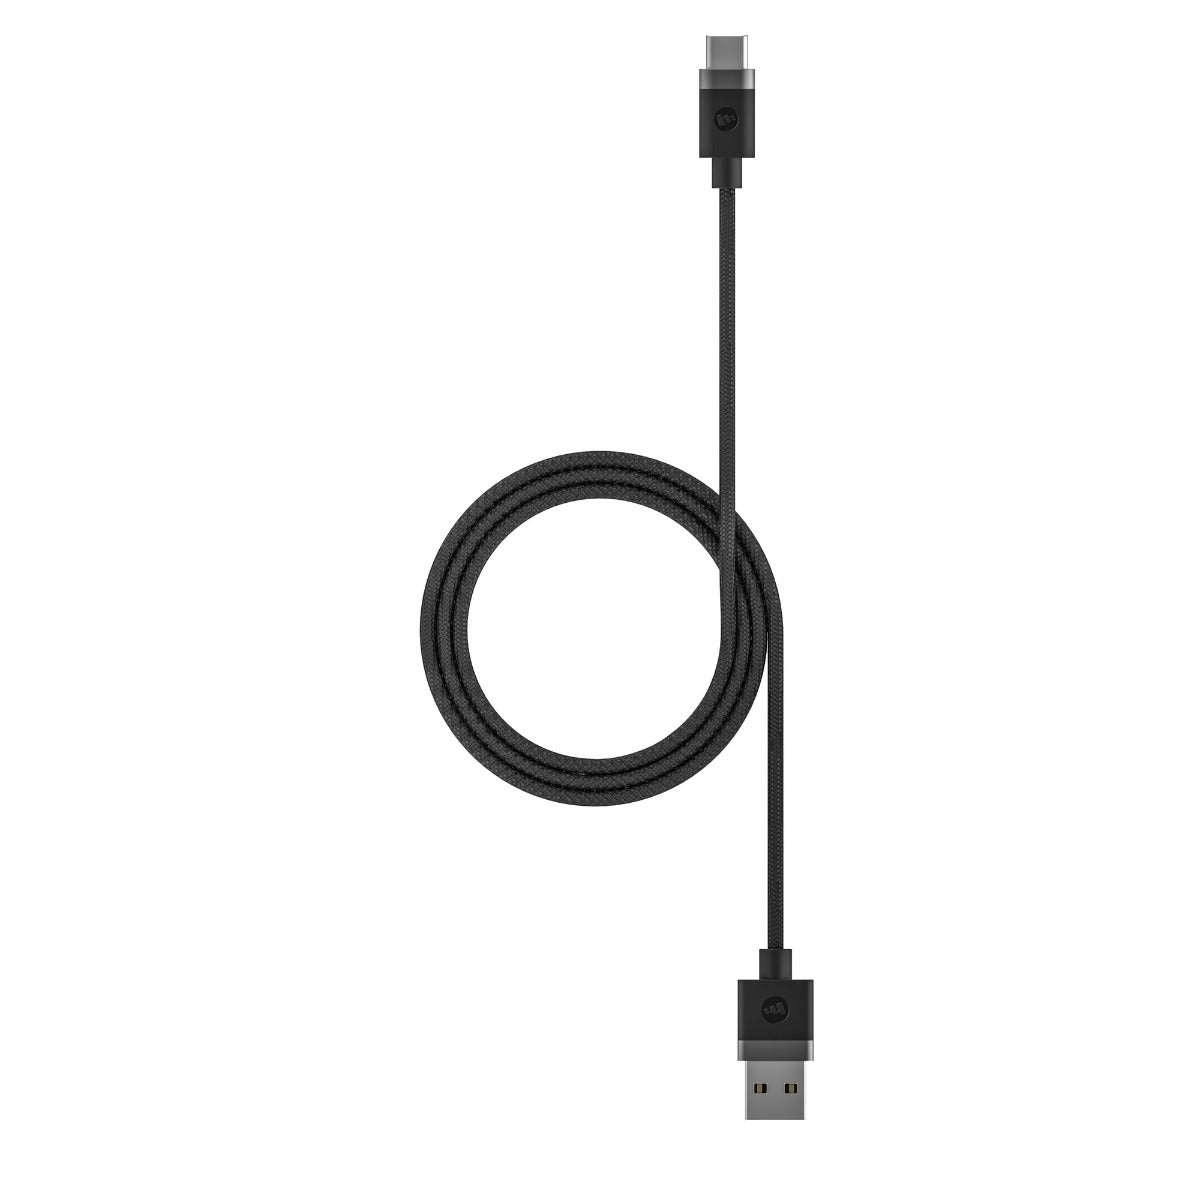 Mophie USB-A Cable With USB-C Connector (apple Exclusive)